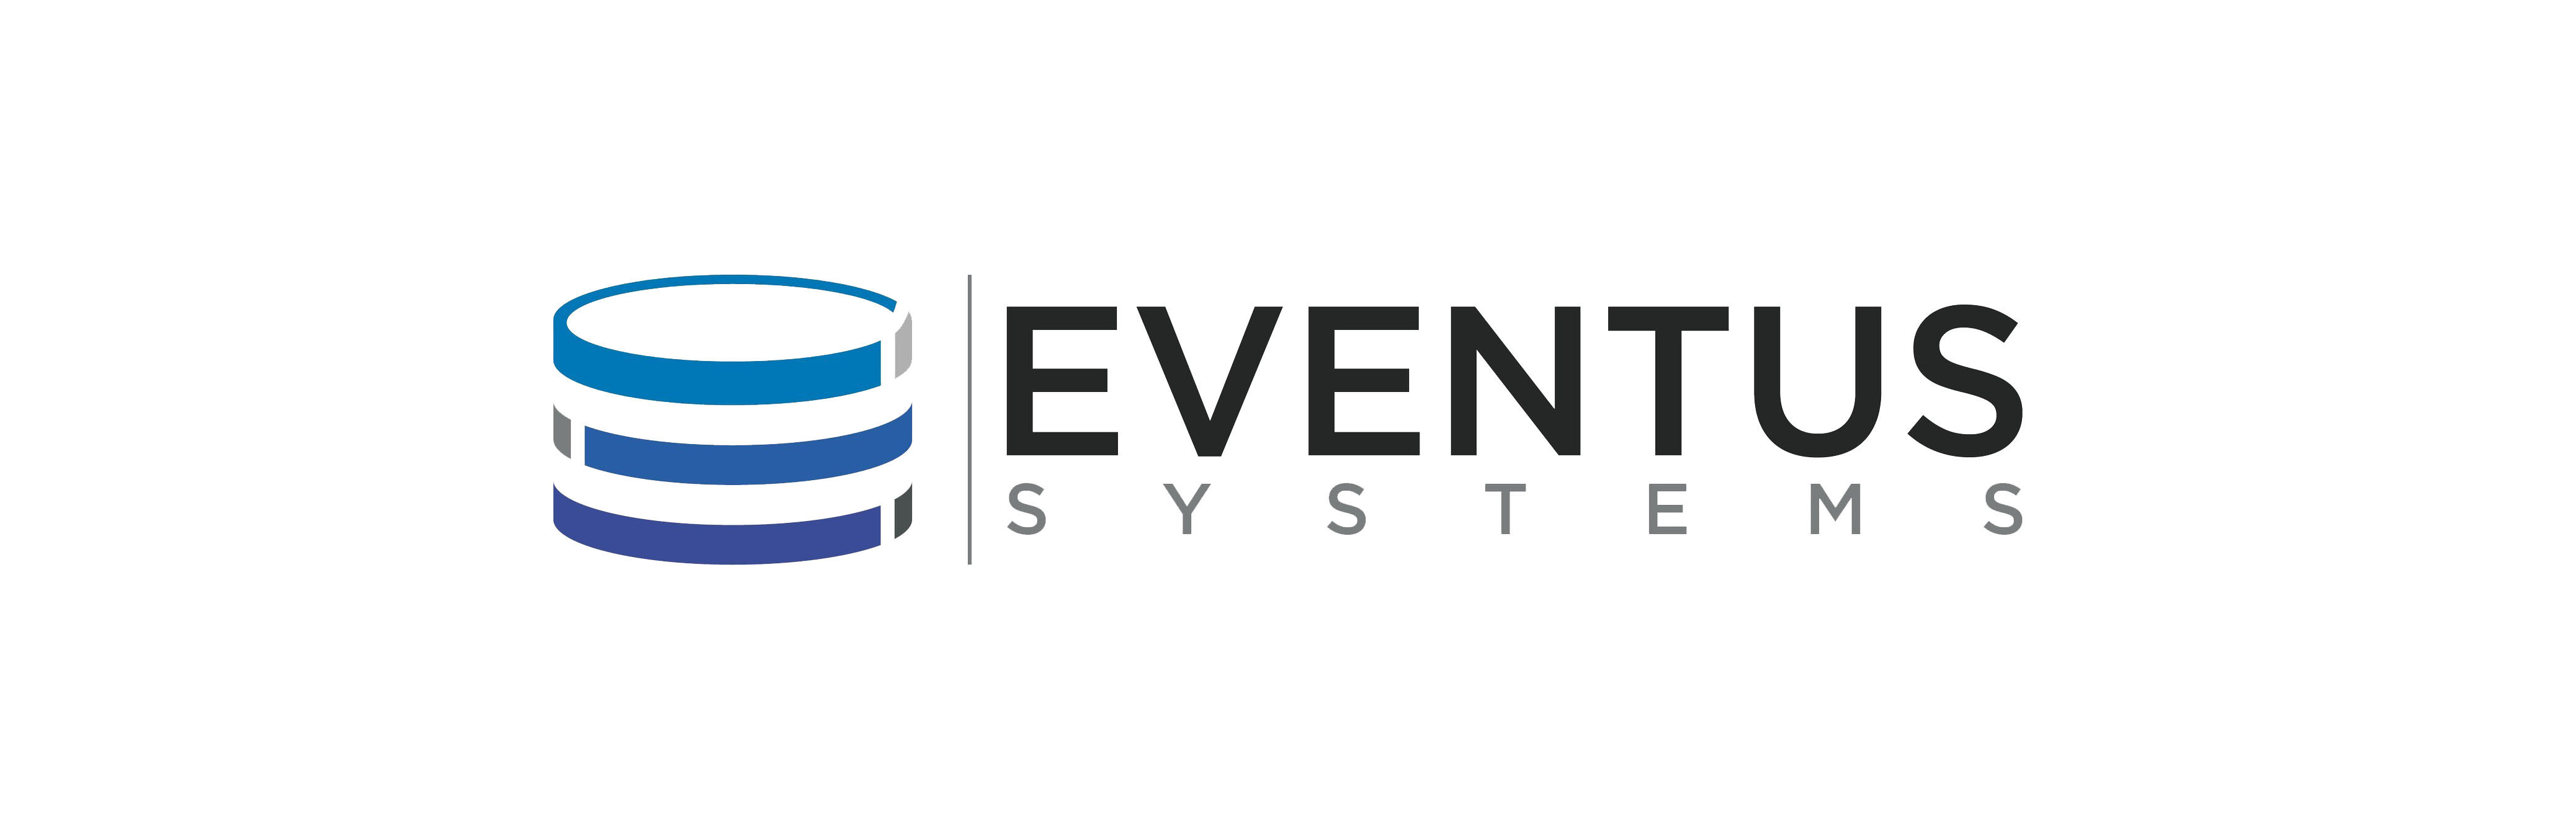 Eventus Systems Named to Global RegTech100 List for 2021